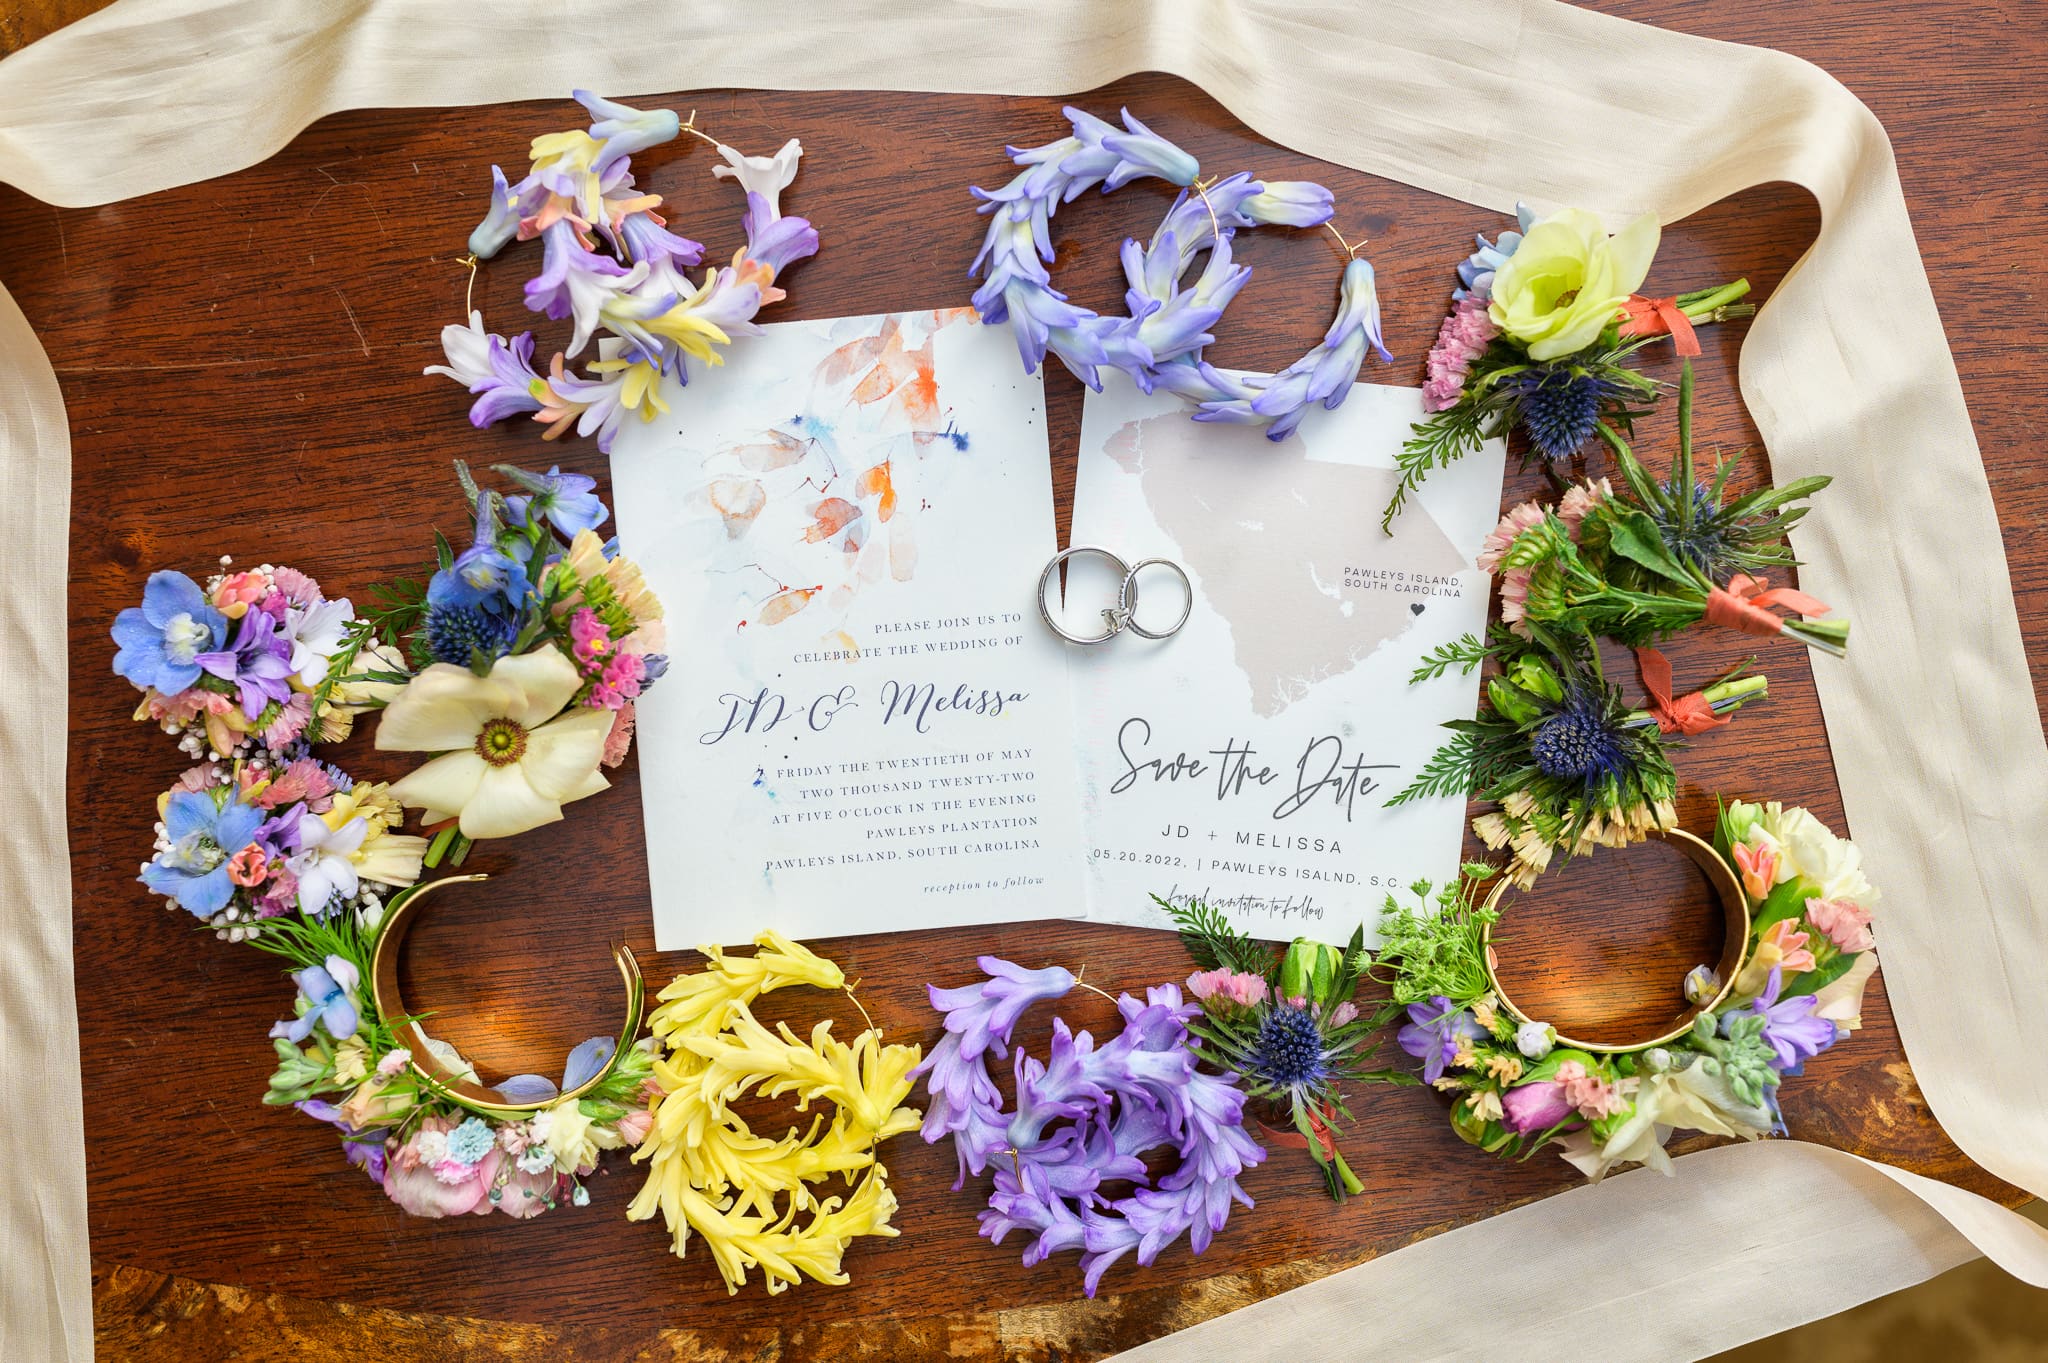 Details of invitation and flowers - Pawleys Plantation Golf & Country Club